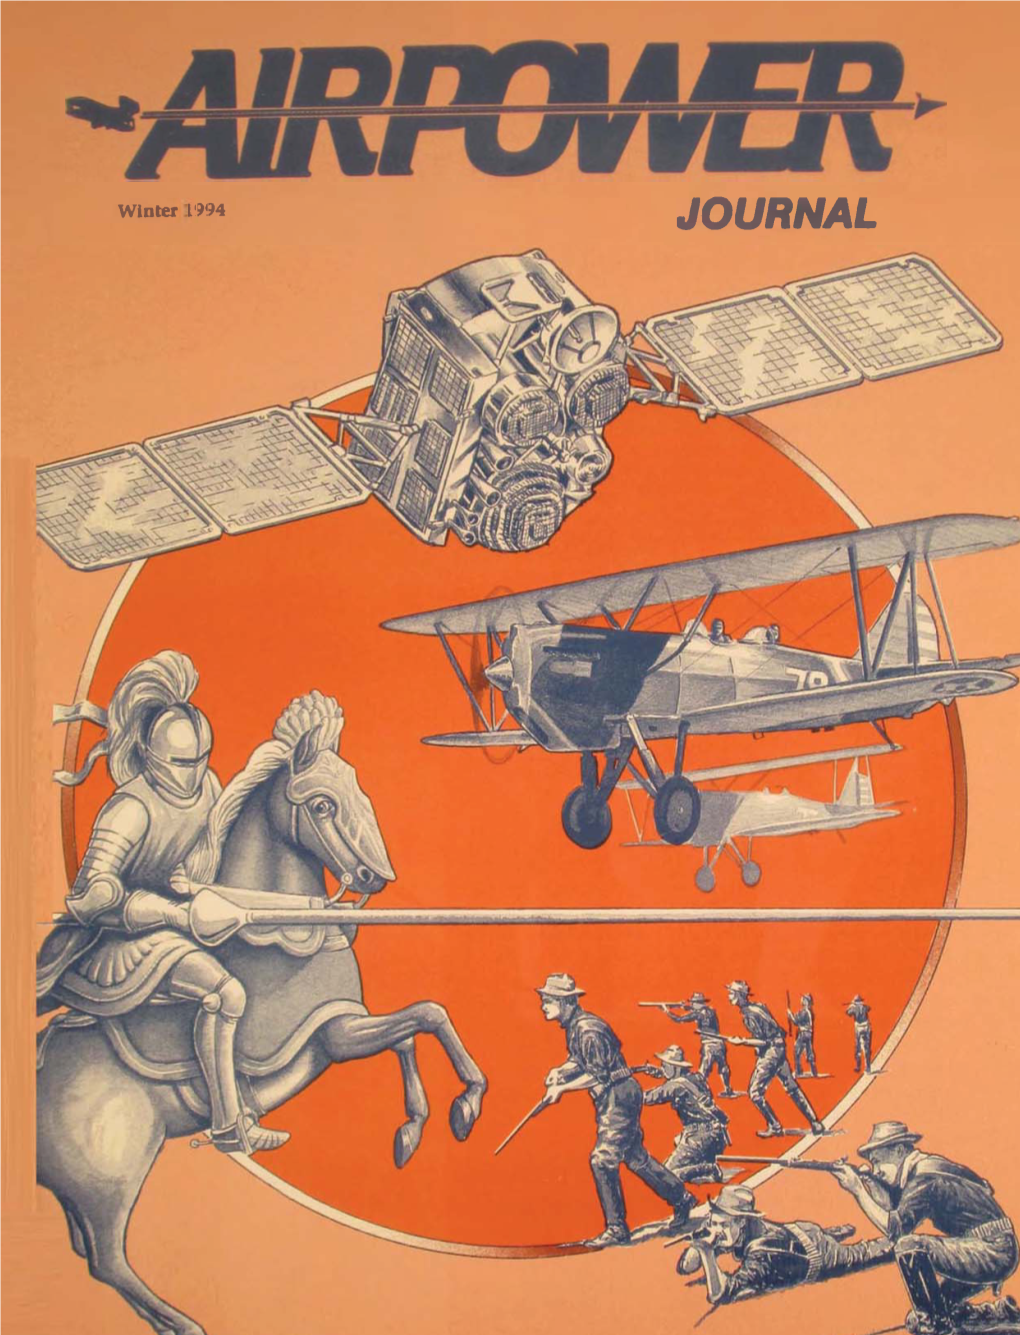 Airpower Journal, Published Quarterly, Is the Professional Journal of the United States Air Force